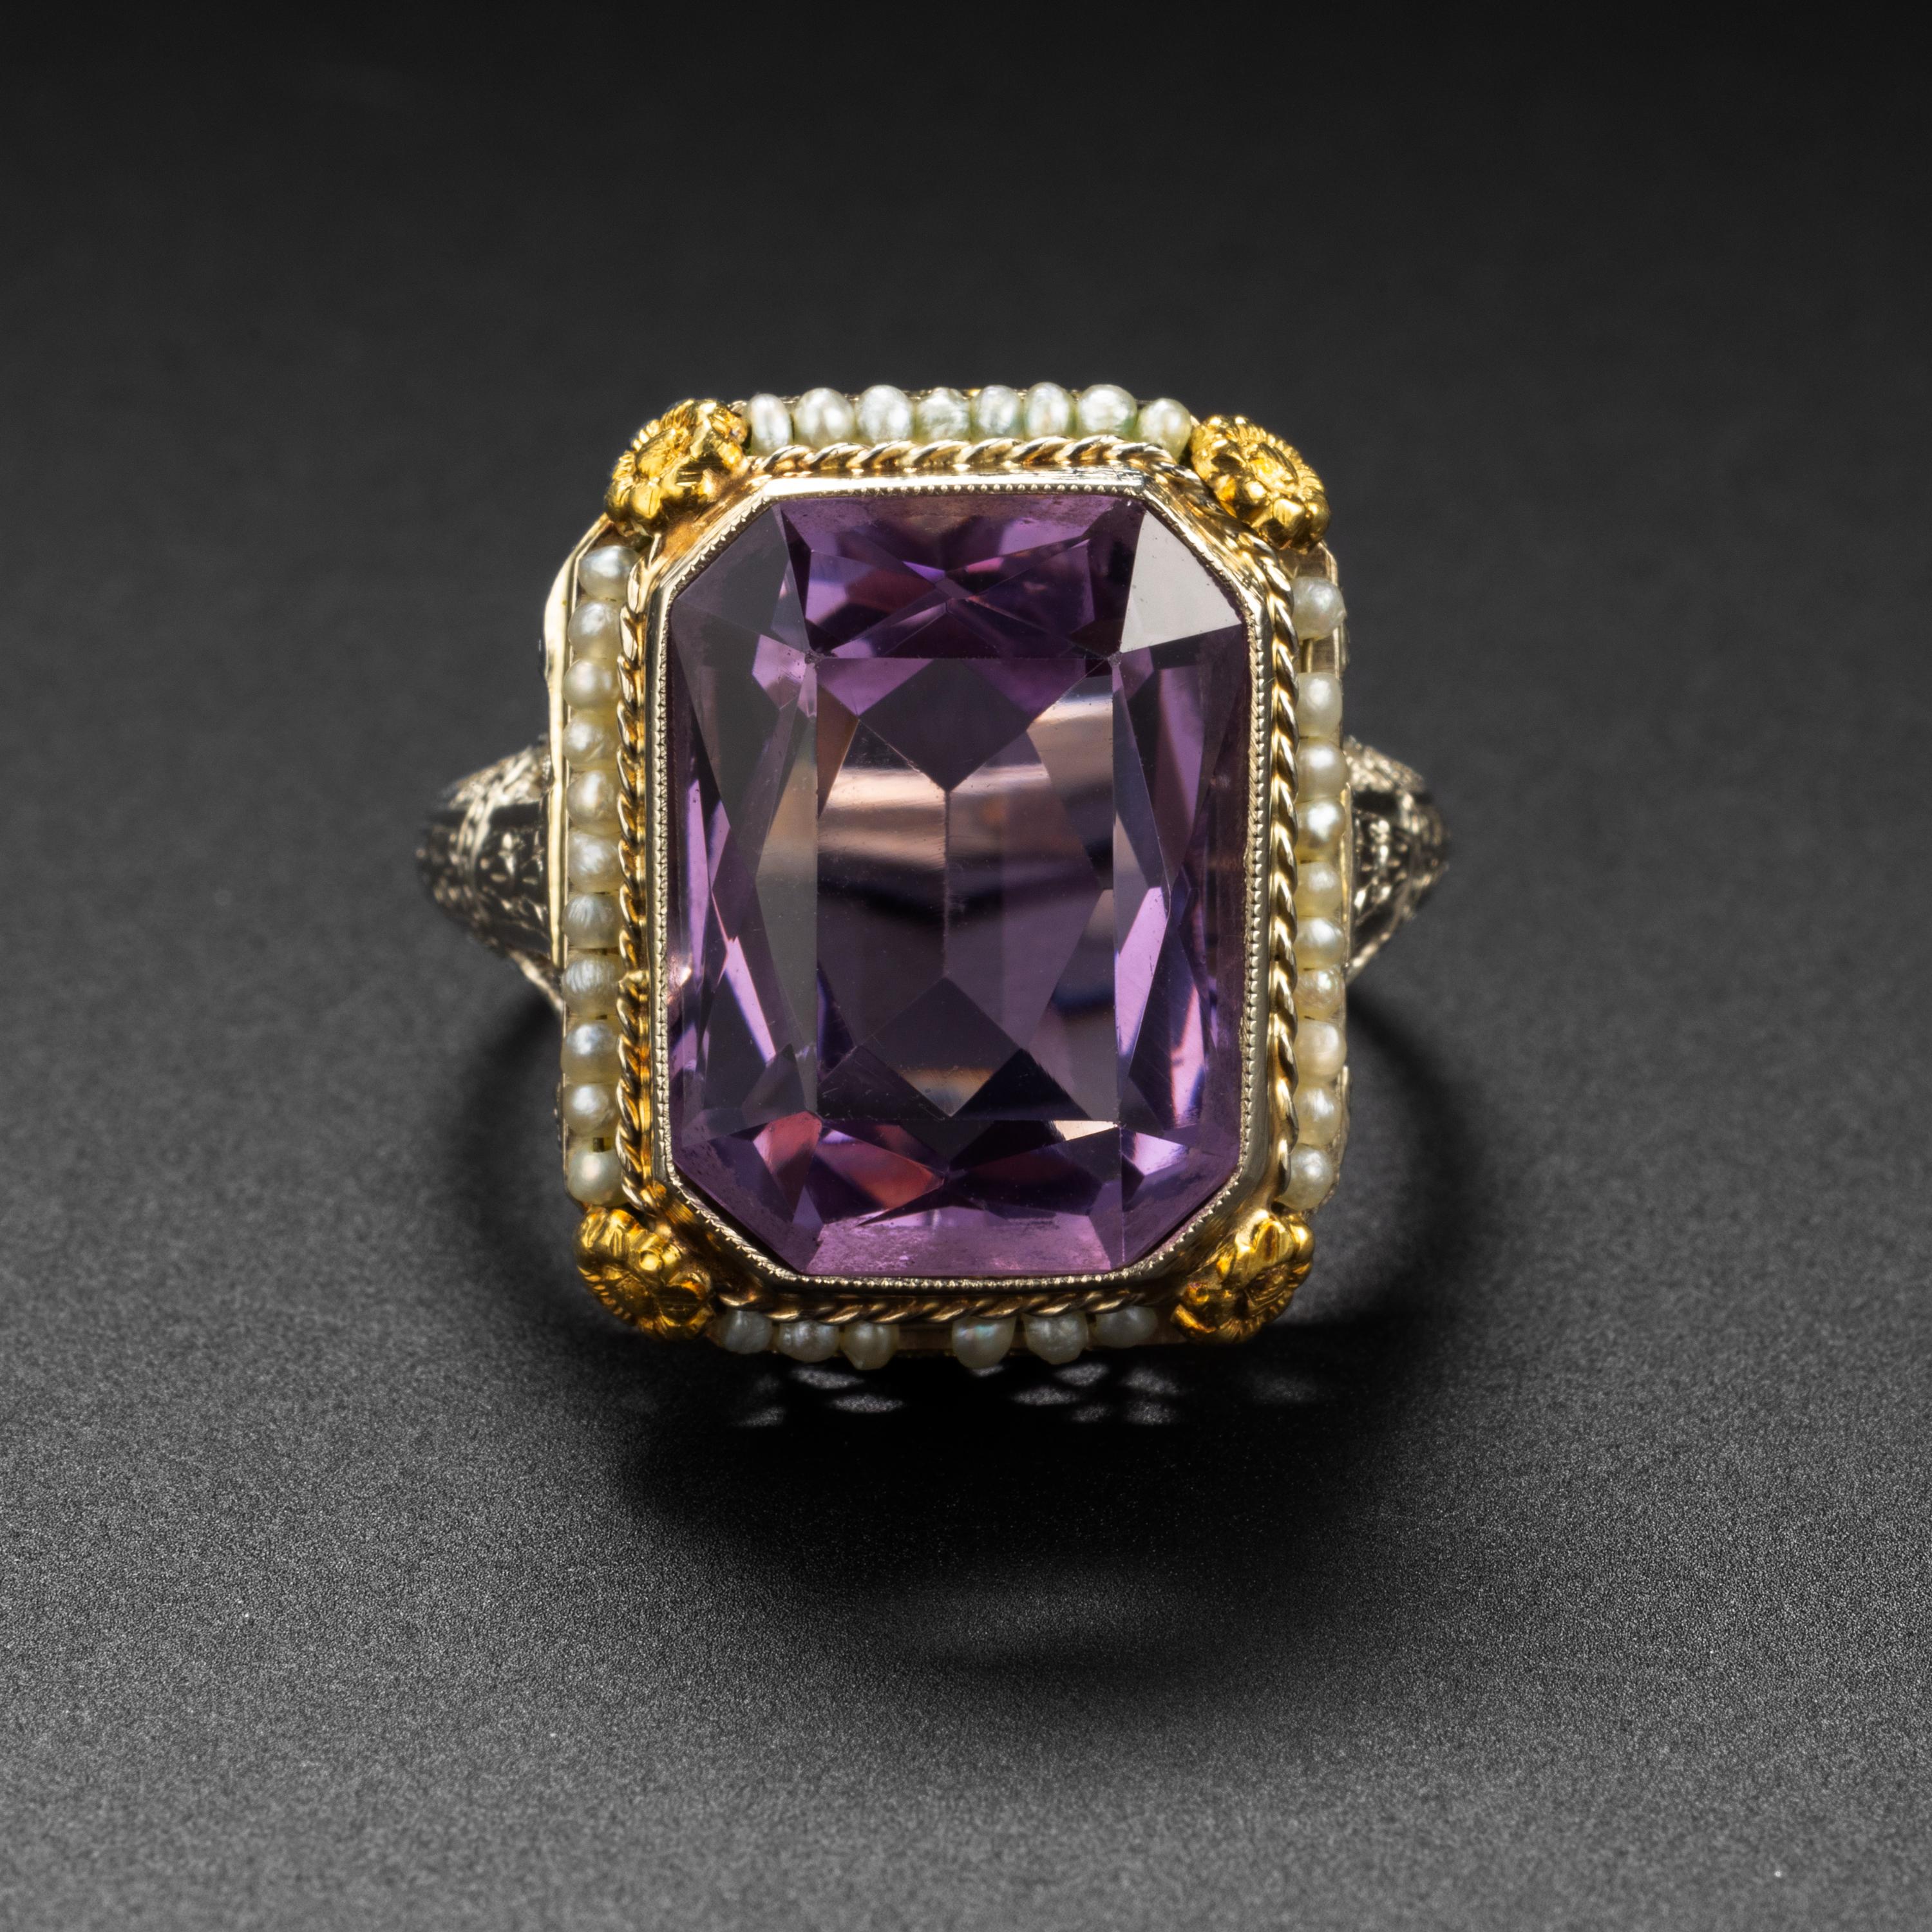 This Edwardian-era amethyst and natural pearl ring features a 15.25 x 12.91mm rectangular-cut natural amethyst of medium tone, bezel-set within an ornate, hand-crafted 14K white and yellow gold mounting and surrounded by a frame of tiny natural